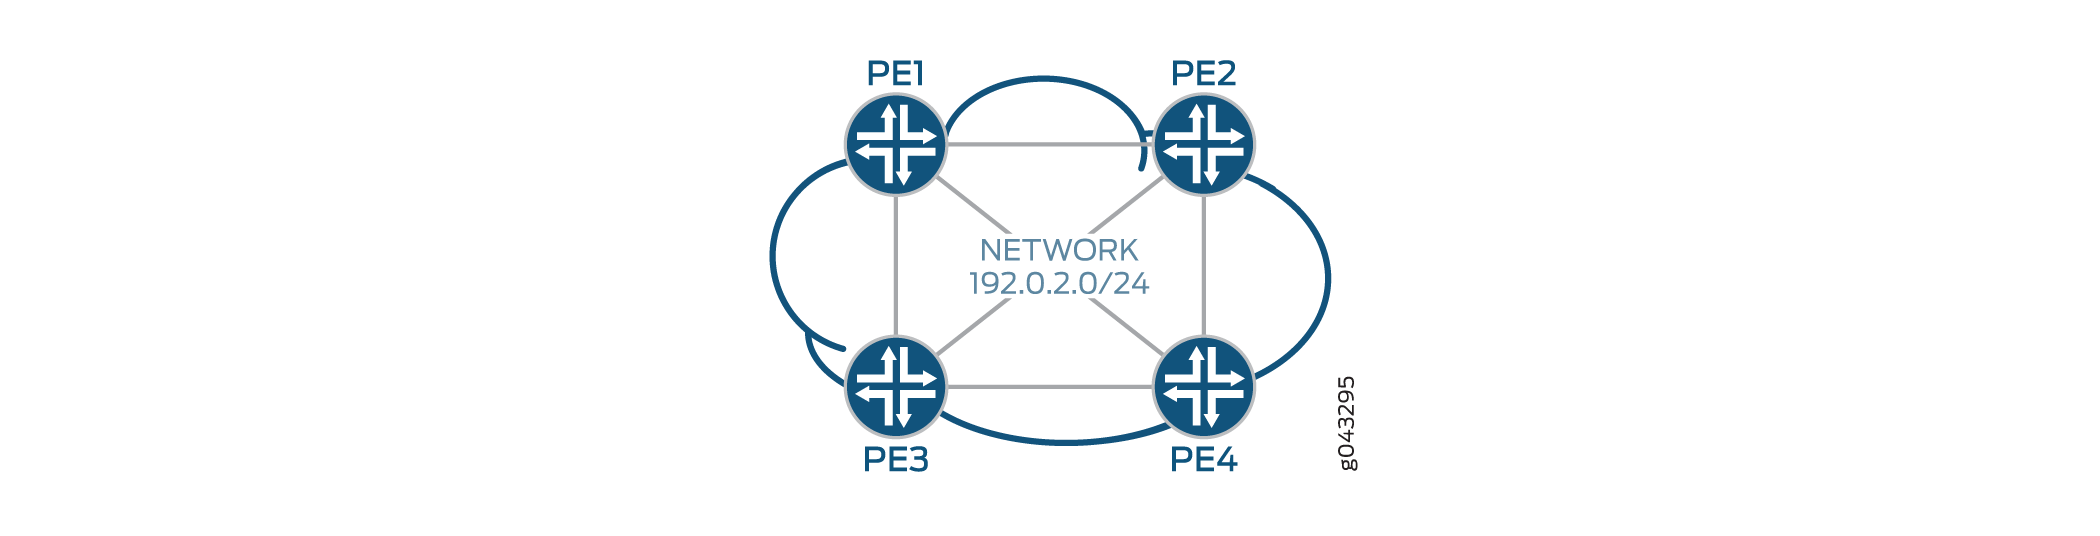 Service Provider Network with PE Routers